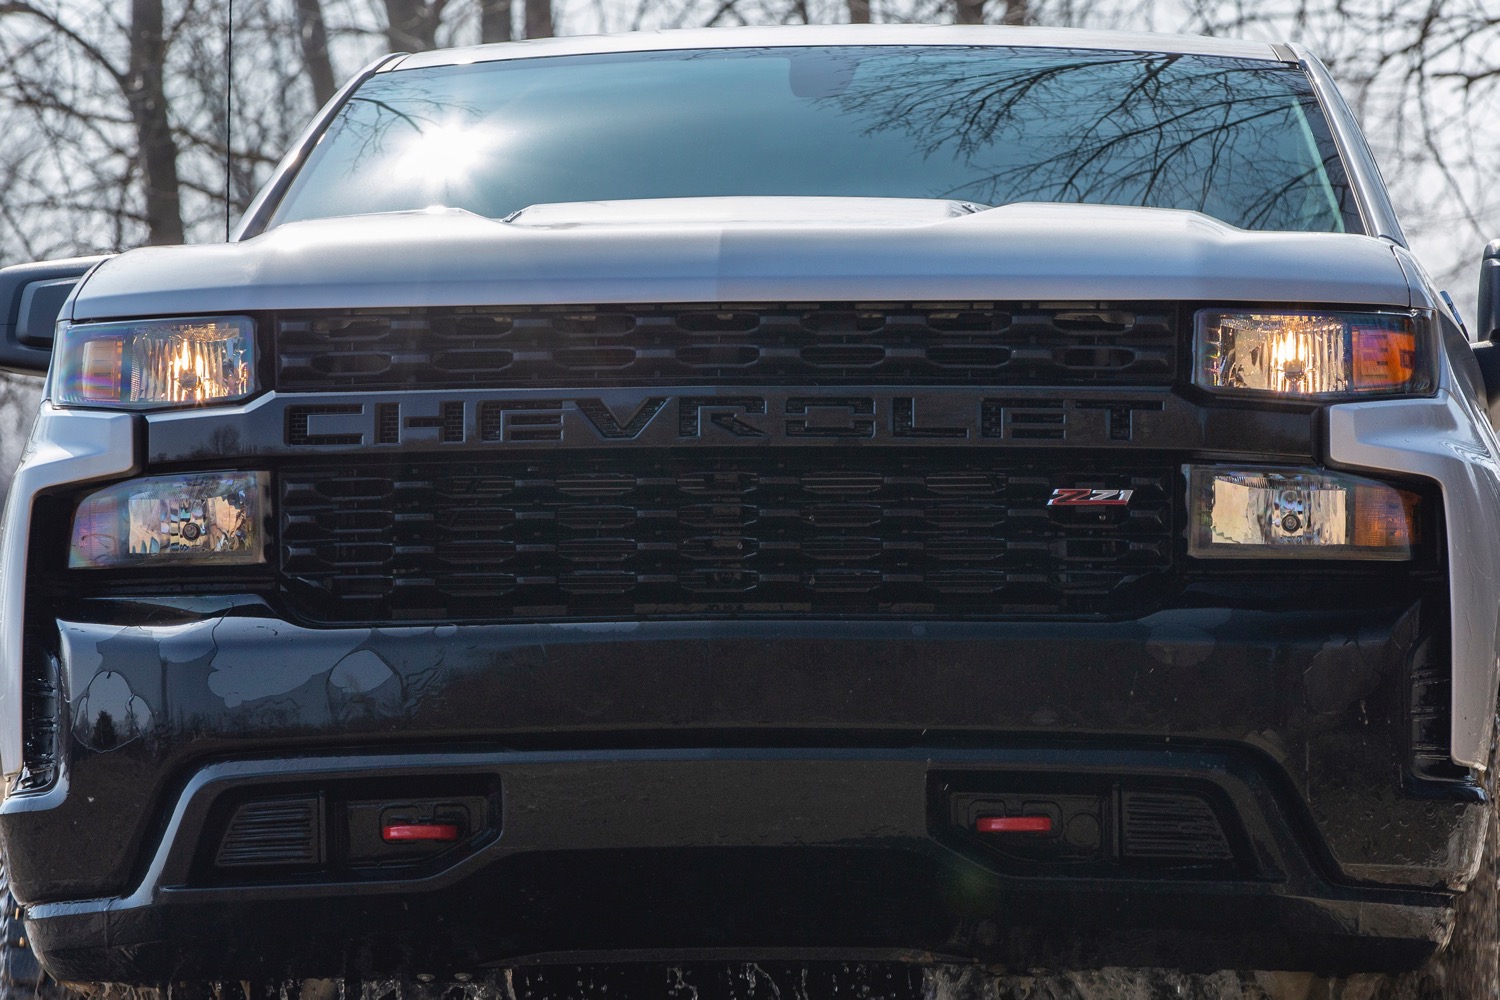 Which Do You Prefer? Chevy Bow Tie Or Chevrolet Lettering?